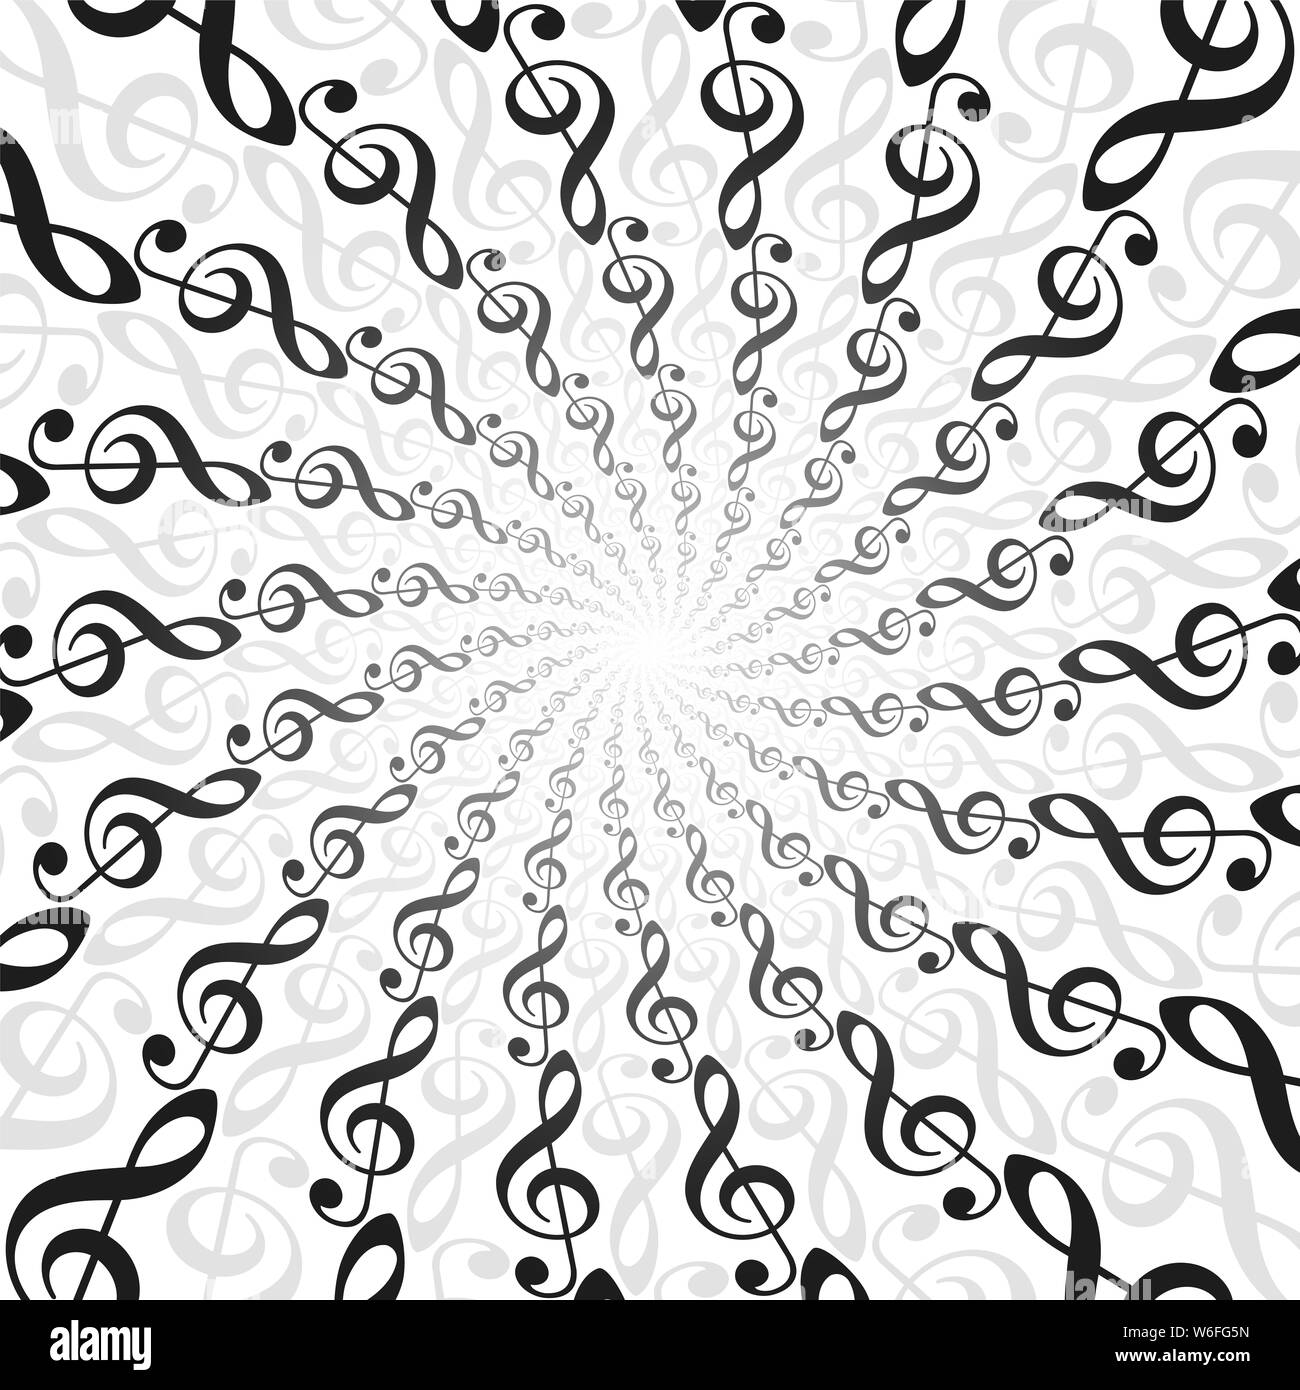 Treble clefs music spirale pattern. Radial energetic tunnel with light center. Twisted circular fractal background illustration. Stock Photo